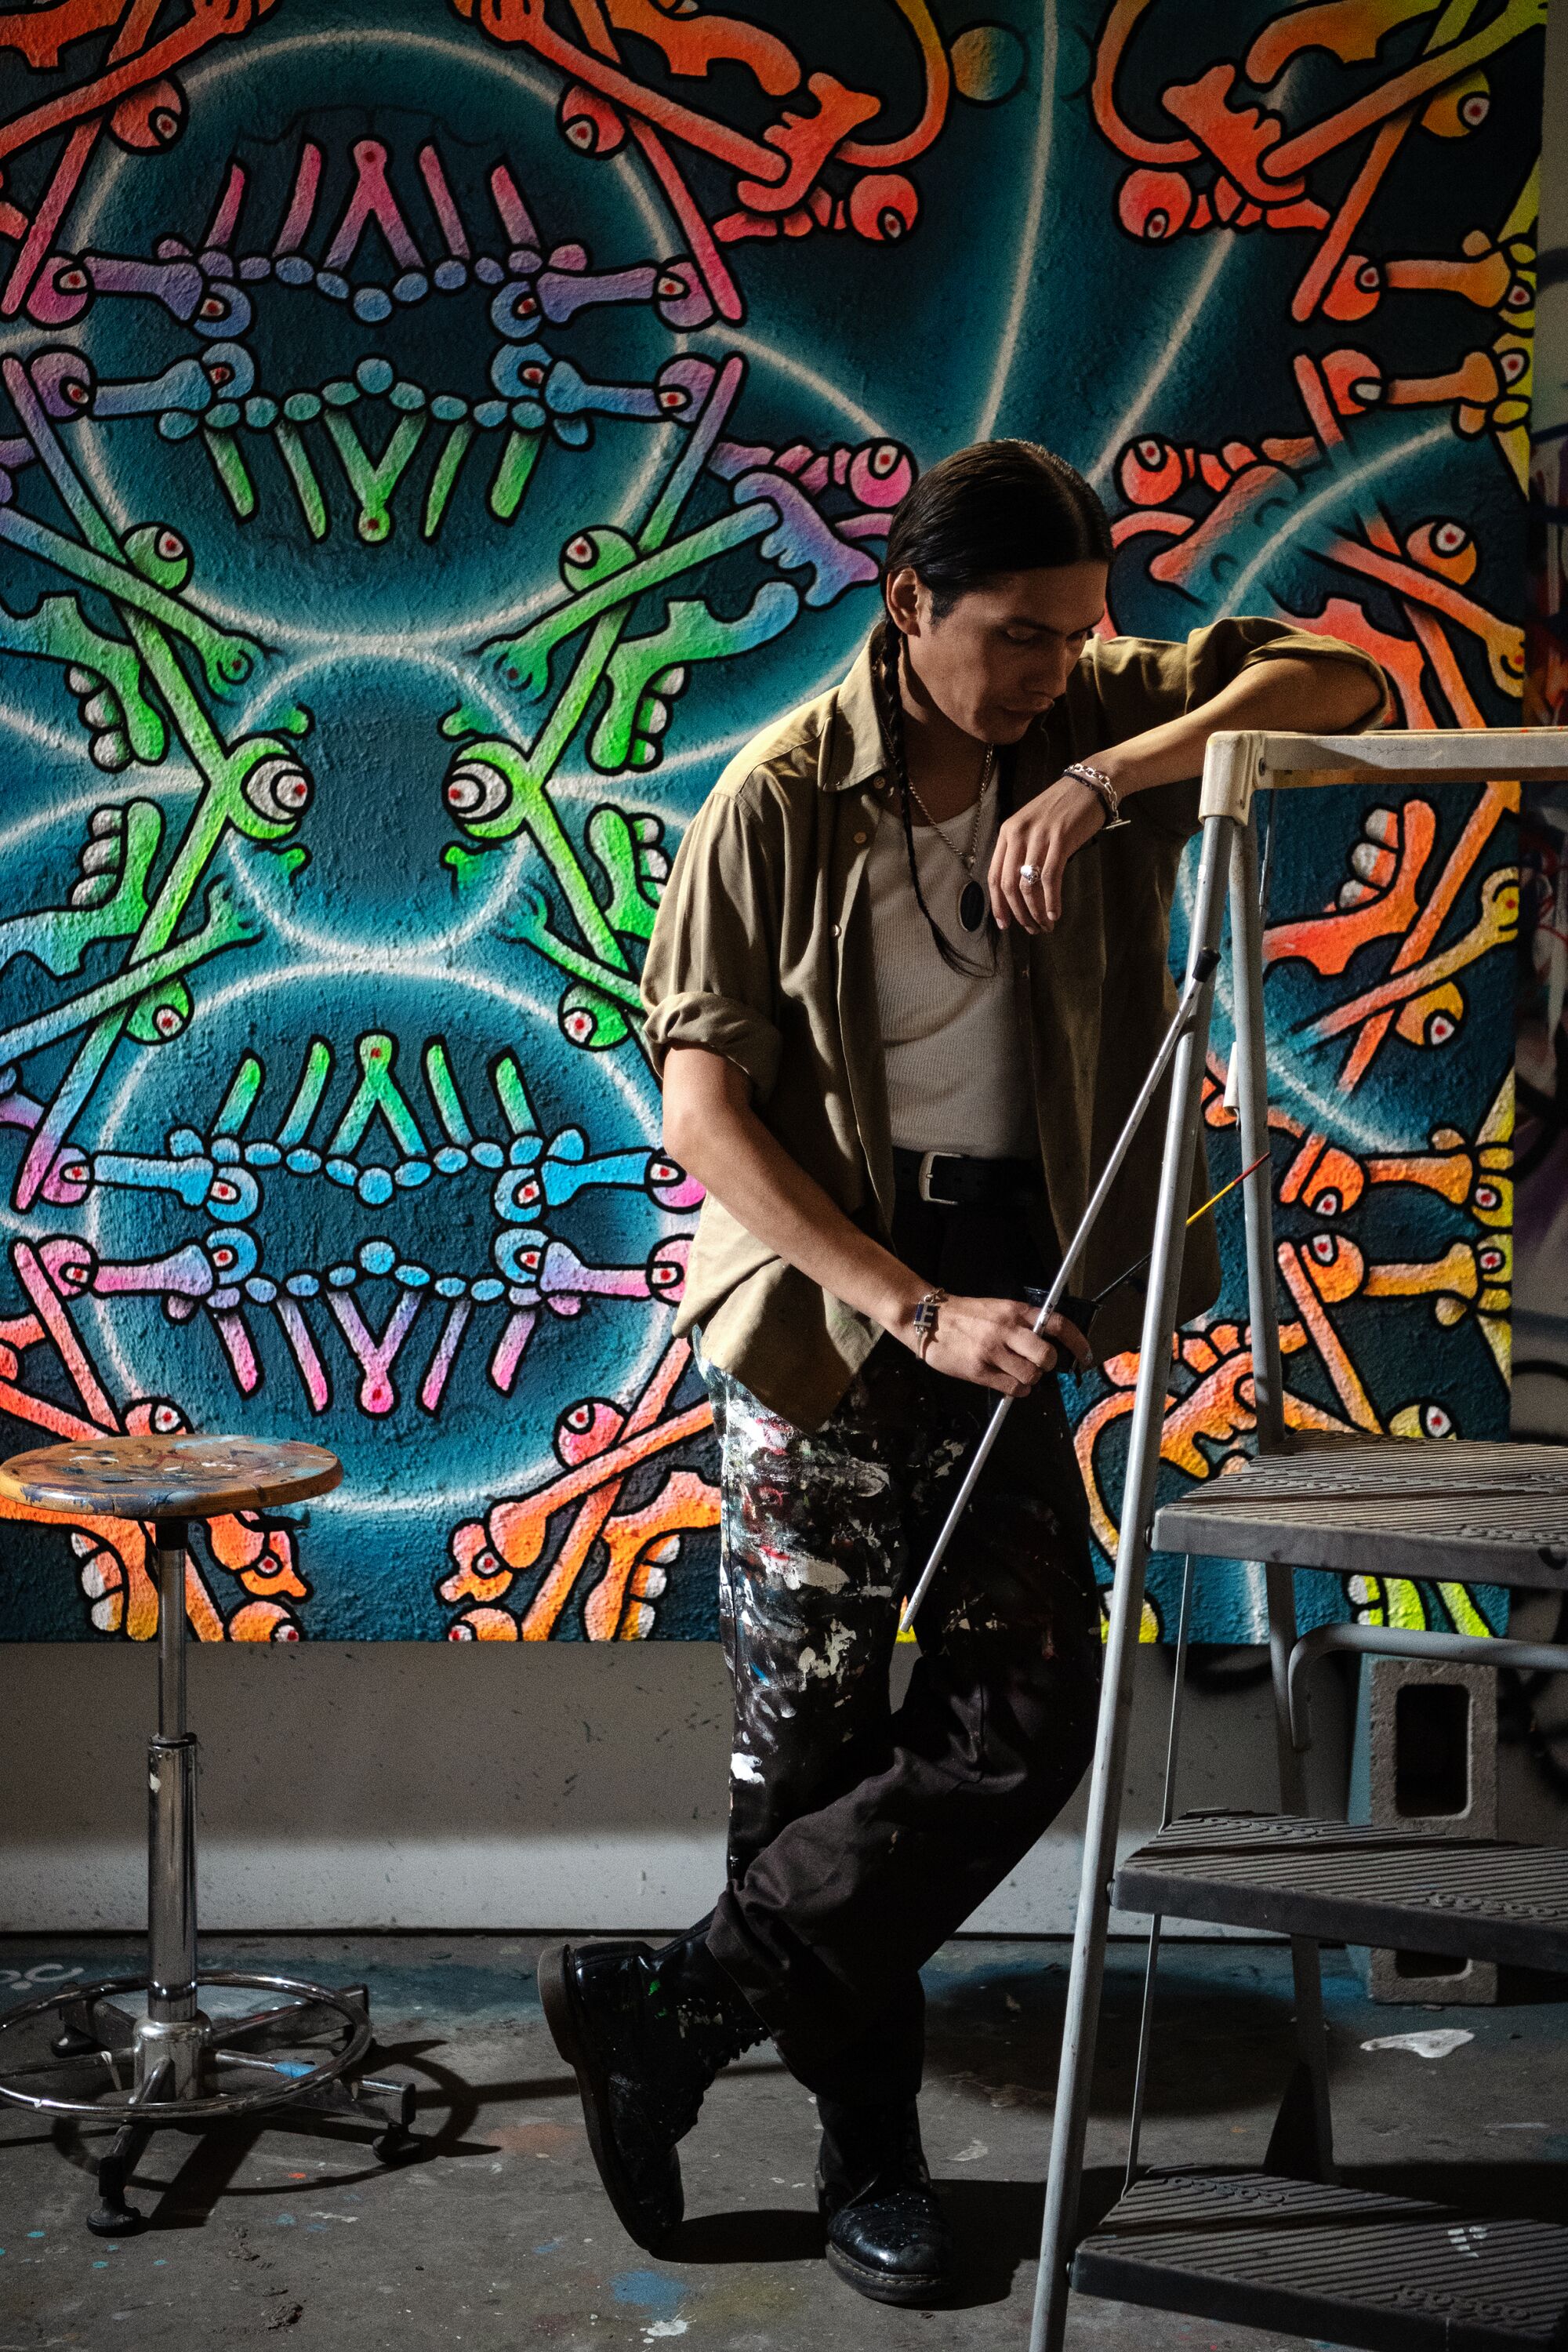 Ozzie Juarez leans on a step ladder, one of his vibrant paintings in the background